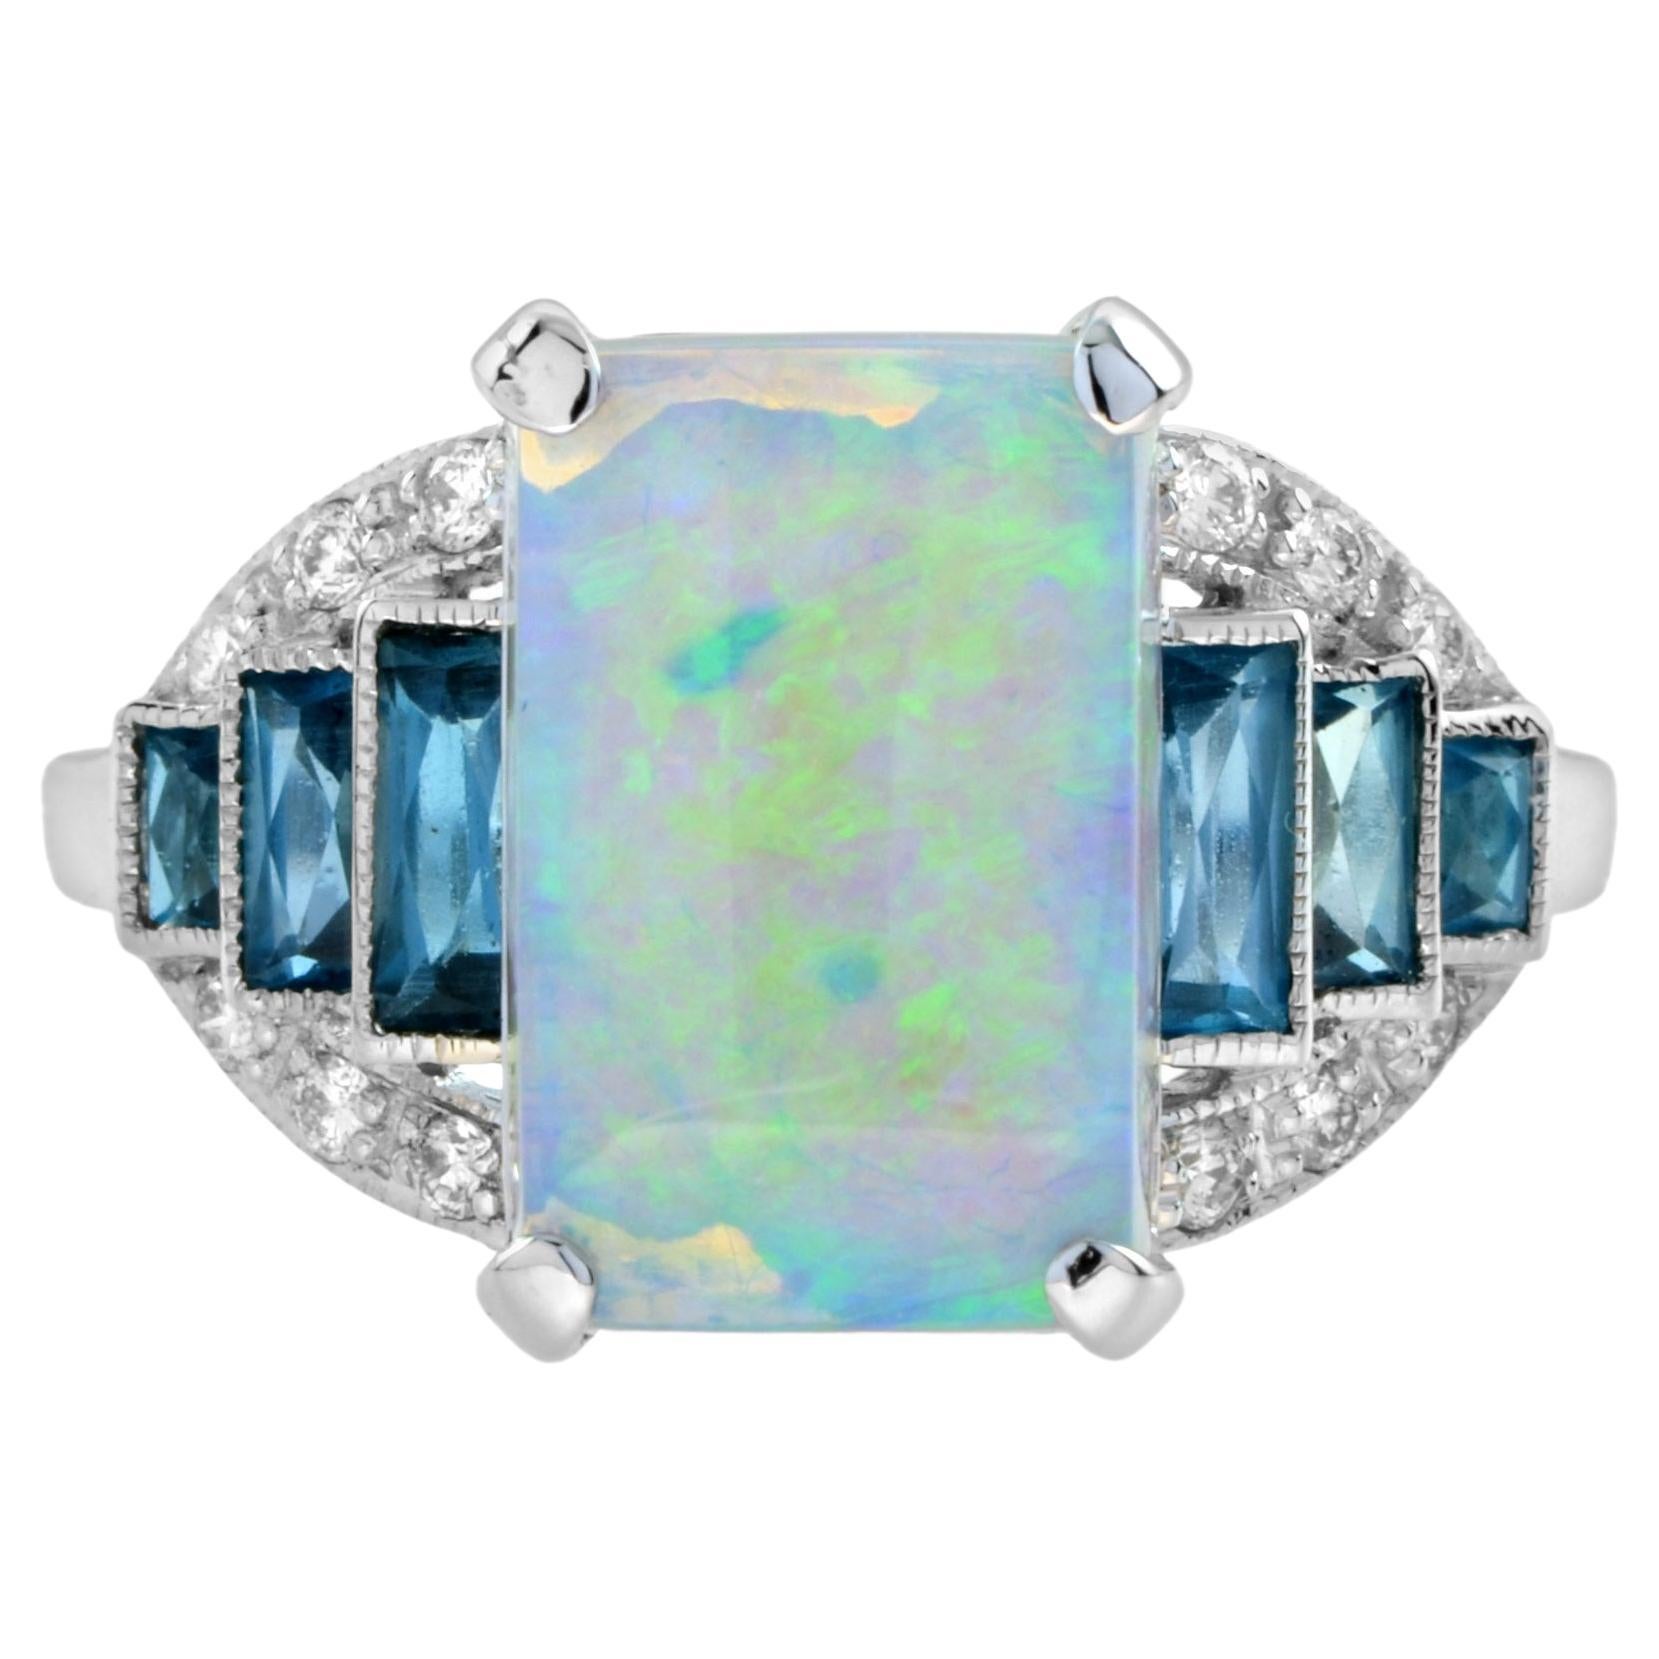 This Art Deco style opal ring features a 2.38 emerald cut authentic opal with baguette cut London blue topaz and diamond on either side. The lovely opal is set with four prongs. The French cut London blue topaz and diamonds are set on both side and